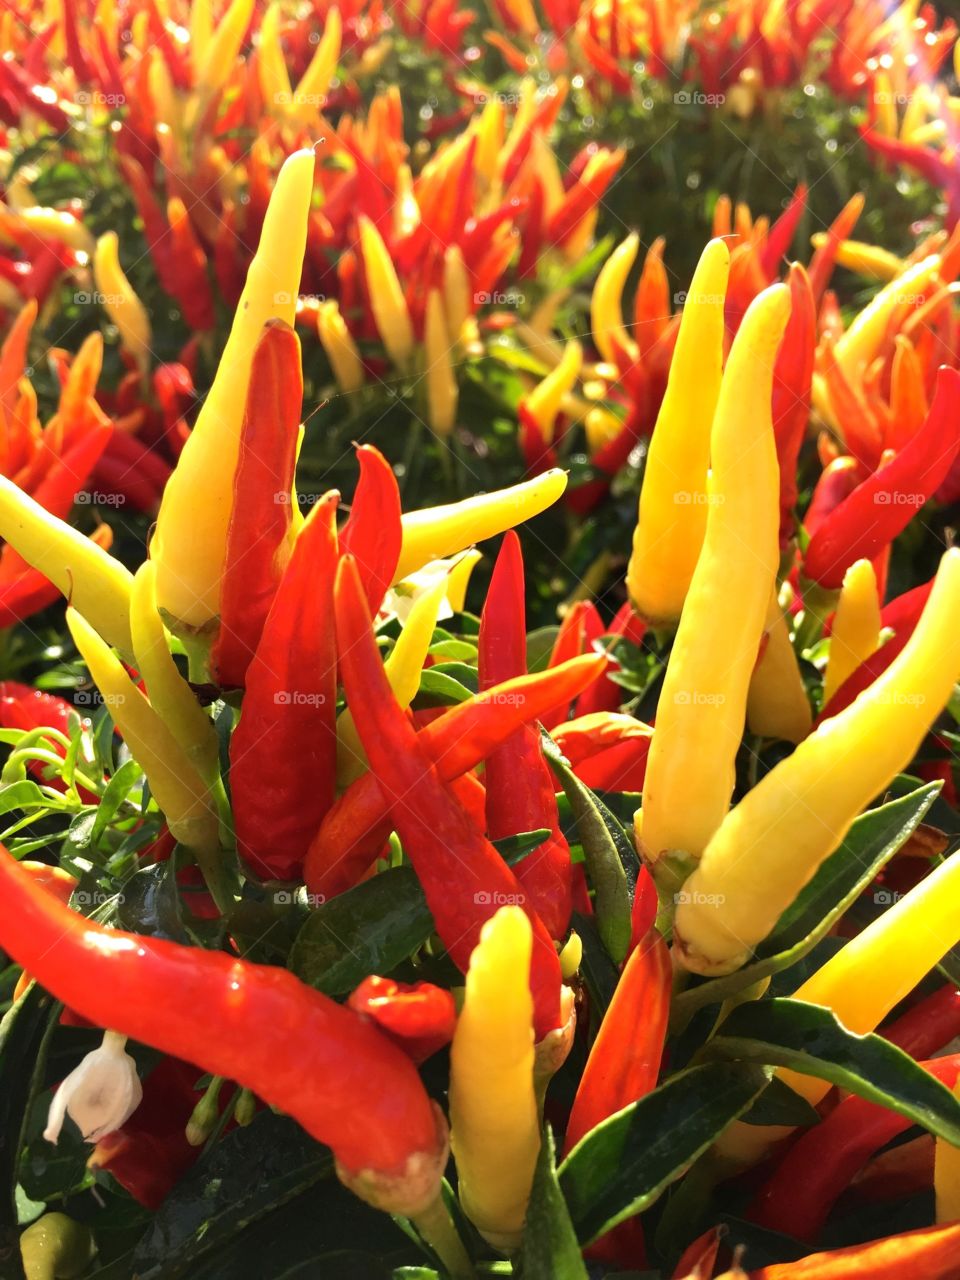 Ornamental Peppers. Red and yellow peppers